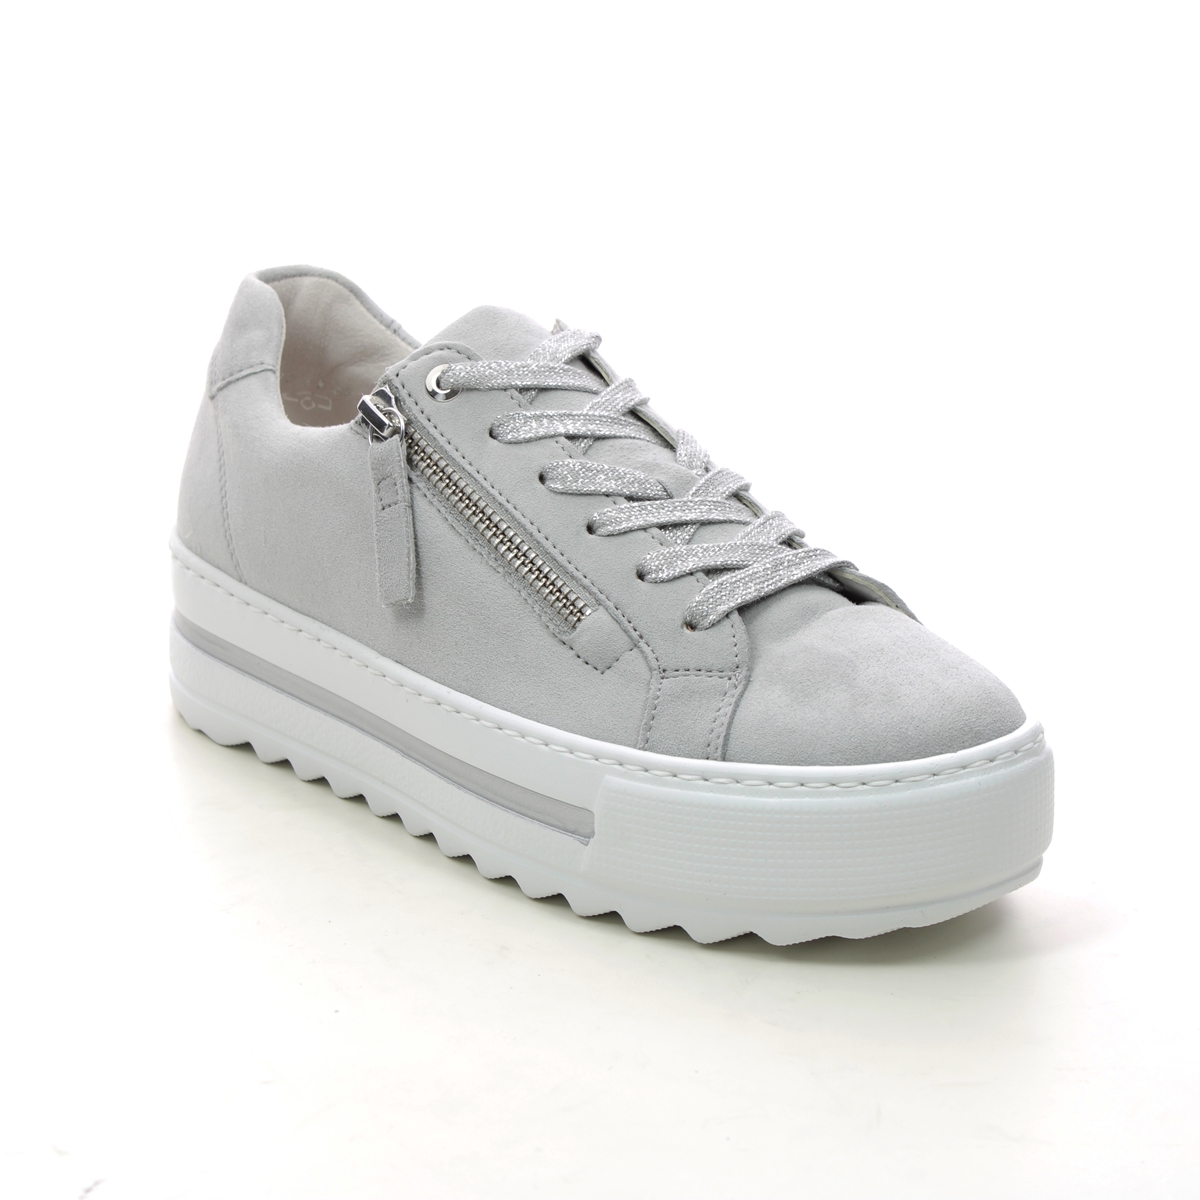 Gabor Heather Light Grey Suede Womens Trainers 26.498.40 In Size 4.5 In Plain Light Grey Suede  Womens Trainers In Soft Light Grey Suede Leather